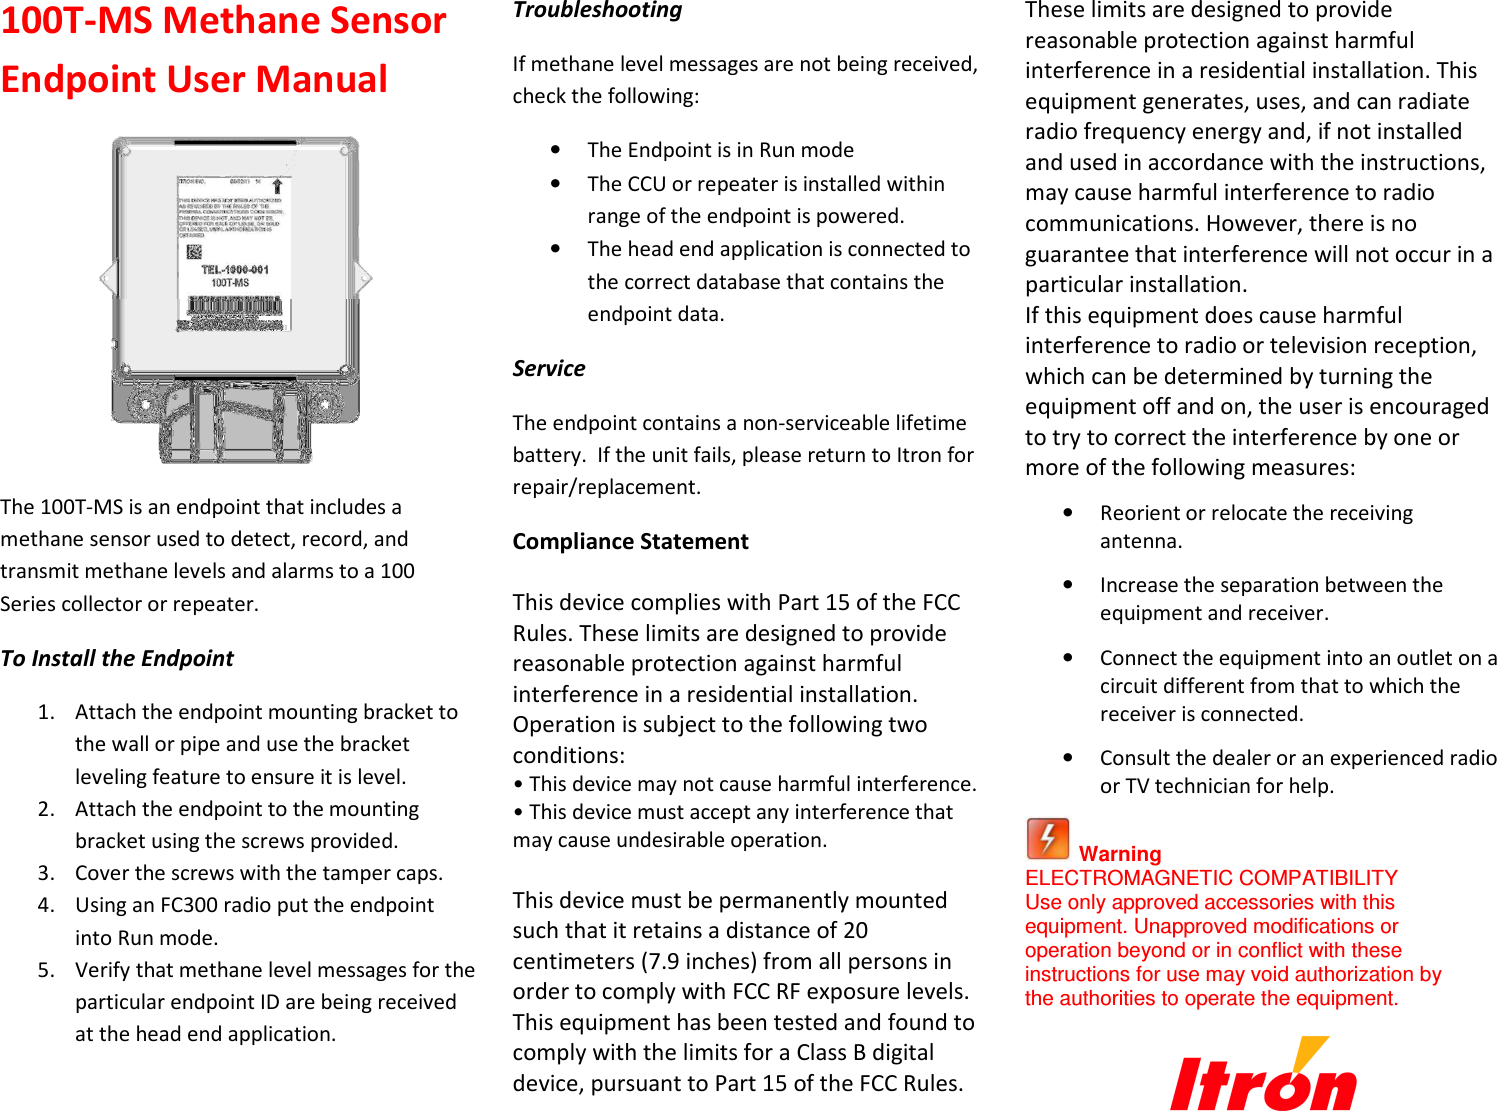 100T-MS Methane Sensor Endpoint User Manual  The 100T-MS is an endpoint that includes a methane sensor used to detect, record, and transmit methane levels and alarms to a 100 Series collector or repeater. To Install the Endpoint 1. Attach the endpoint mounting bracket to the wall or pipe and use the bracket leveling feature to ensure it is level. 2. Attach the endpoint to the mounting bracket using the screws provided. 3. Cover the screws with the tamper caps. 4. Using an FC300 radio put the endpoint into Run mode. 5. Verify that methane level messages for the particular endpoint ID are being received at the head end application.  Troubleshooting If methane level messages are not being received, check the following: • The Endpoint is in Run mode • The CCU or repeater is installed within range of the endpoint is powered. • The head end application is connected to the correct database that contains the endpoint data. Service The endpoint contains a non-serviceable lifetime battery.  If the unit fails, please return to Itron for repair/replacement. Compliance Statement   This device complies with Part 15 of the FCC Rules. These limits are designed to provide reasonable protection against harmful interference in a residential installation. Operation is subject to the following two conditions:  • This device may not cause harmful interference.  • This device must accept any interference that may cause undesirable operation.   This device must be permanently mounted such that it retains a distance of 20 centimeters (7.9 inches) from all persons in order to comply with FCC RF exposure levels.  This equipment has been tested and found to comply with the limits for a Class B digital device, pursuant to Part 15 of the FCC Rules. These limits are designed to provide reasonable protection against harmful interference in a residential installation. This equipment generates, uses, and can radiate radio frequency energy and, if not installed and used in accordance with the instructions, may cause harmful interference to radio communications. However, there is no guarantee that interference will not occur in a particular installation.  If this equipment does cause harmful interference to radio or television reception, which can be determined by turning the equipment off and on, the user is encouraged to try to correct the interference by one or more of the following measures:   • Reorient or relocate the receiving antenna.   • Increase the separation between the equipment and receiver.   • Connect the equipment into an outlet on a circuit different from that to which the receiver is connected.   • Consult the dealer or an experienced radio or TV technician for help.    Warning  ELECTROMAGNETIC COMPATIBILITY  Use only approved accessories with this equipment. Unapproved modifications or operation beyond or in conflict with these instructions for use may void authorization by the authorities to operate the equipment.    